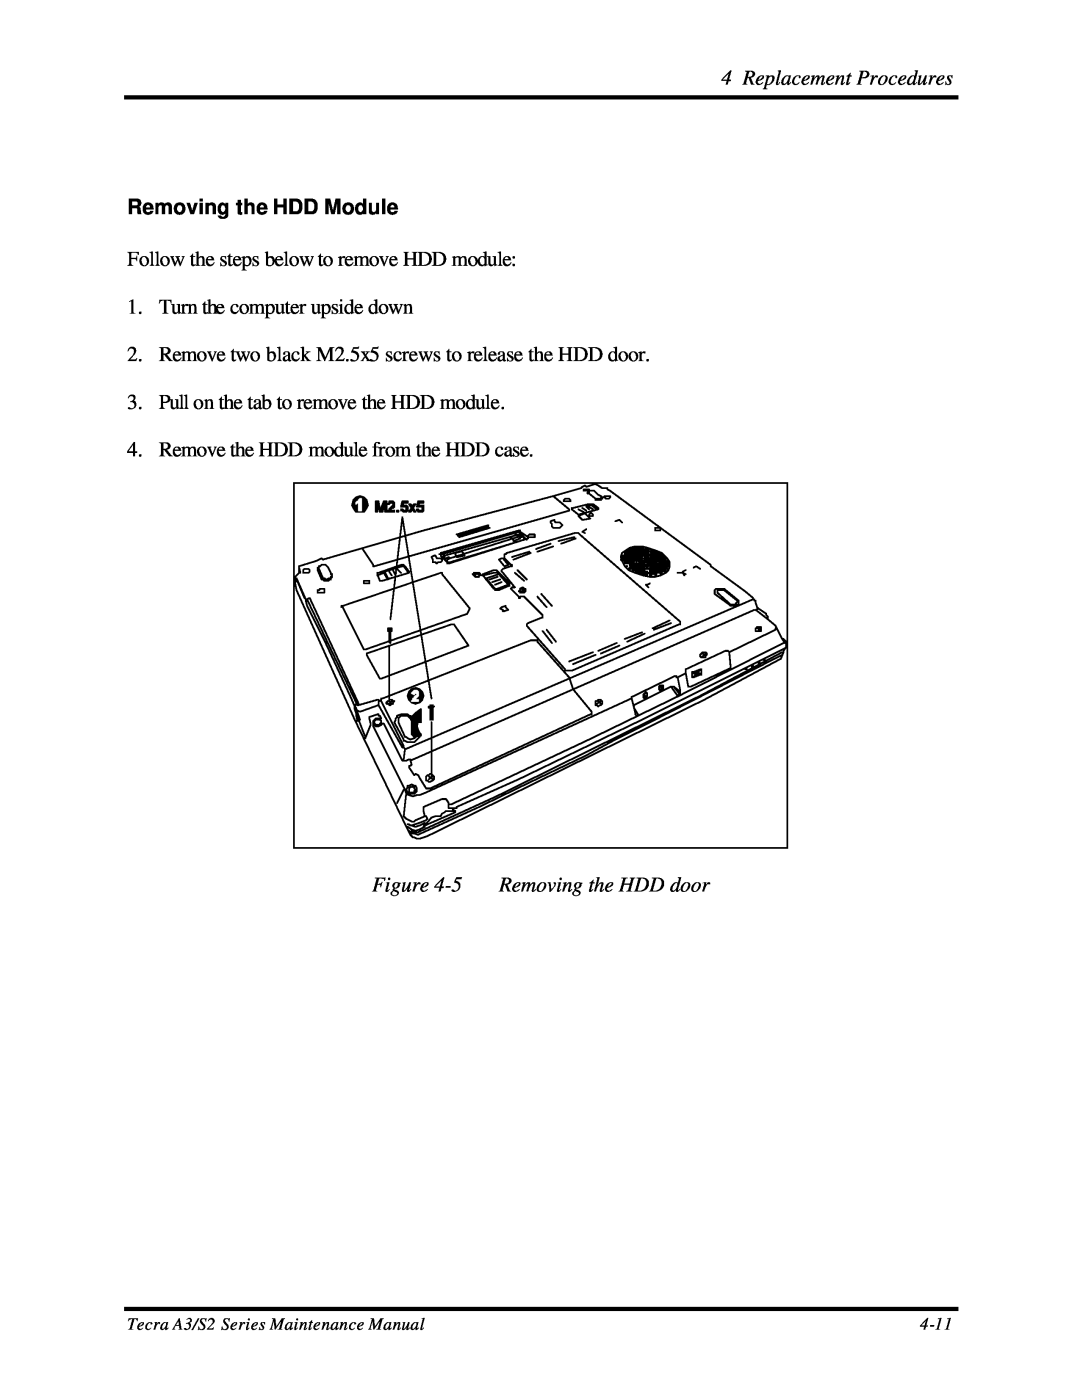 Toshiba Removing the HDD Module, 5 Removing the HDD door, Replacement Procedures, Tecra A3/S2 Series Maintenance Manual 